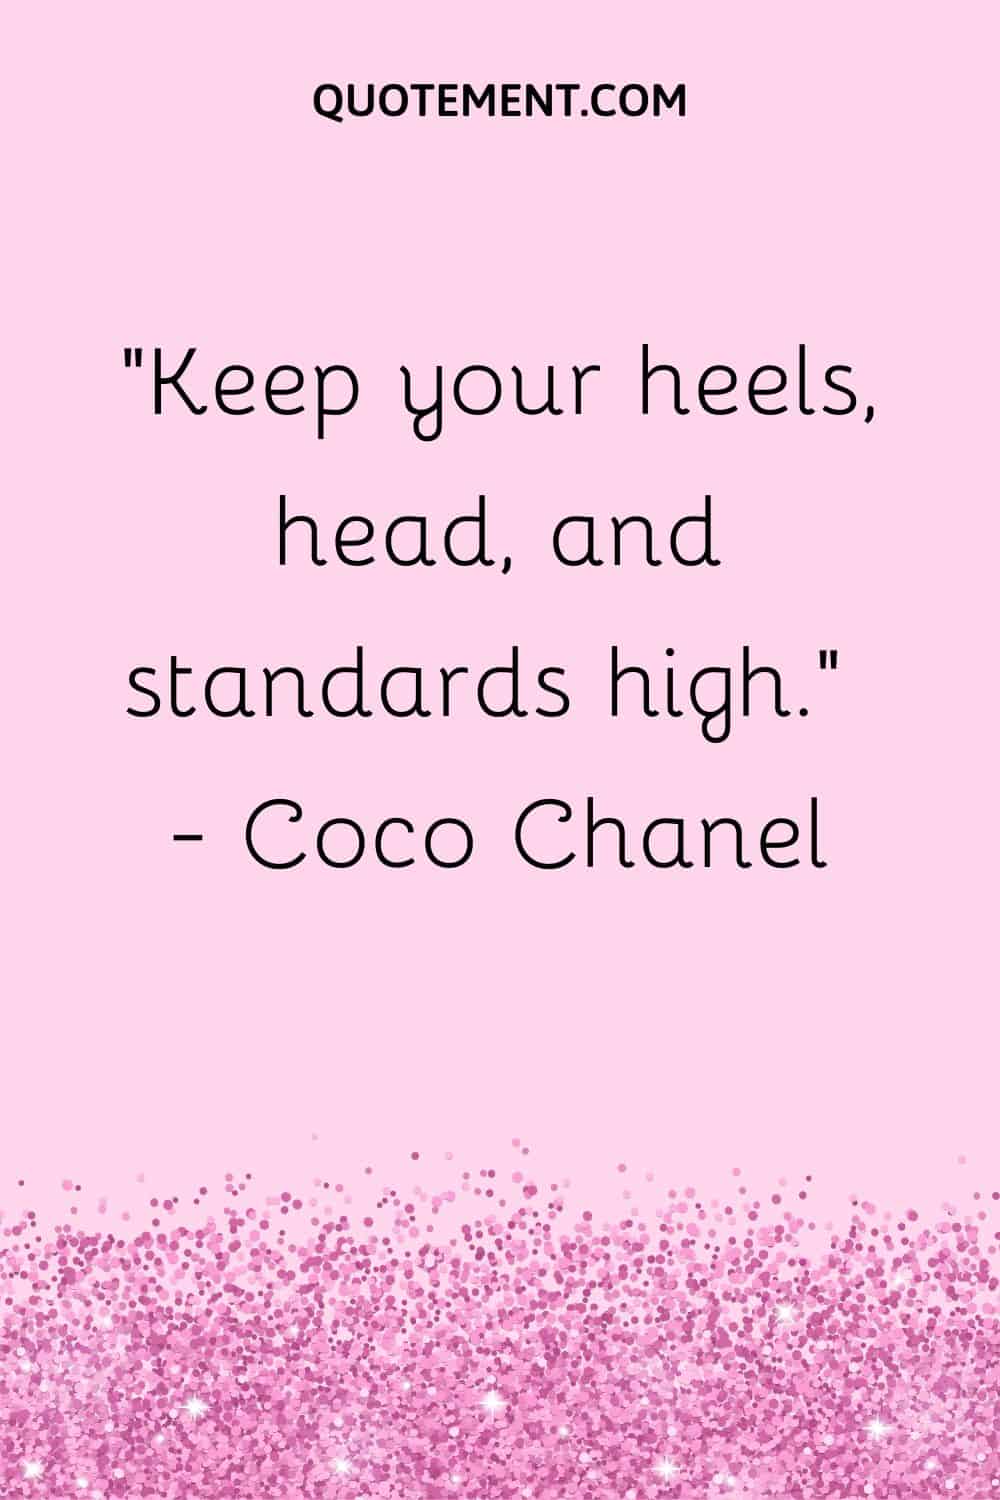 Keep your heels, head, and standards high